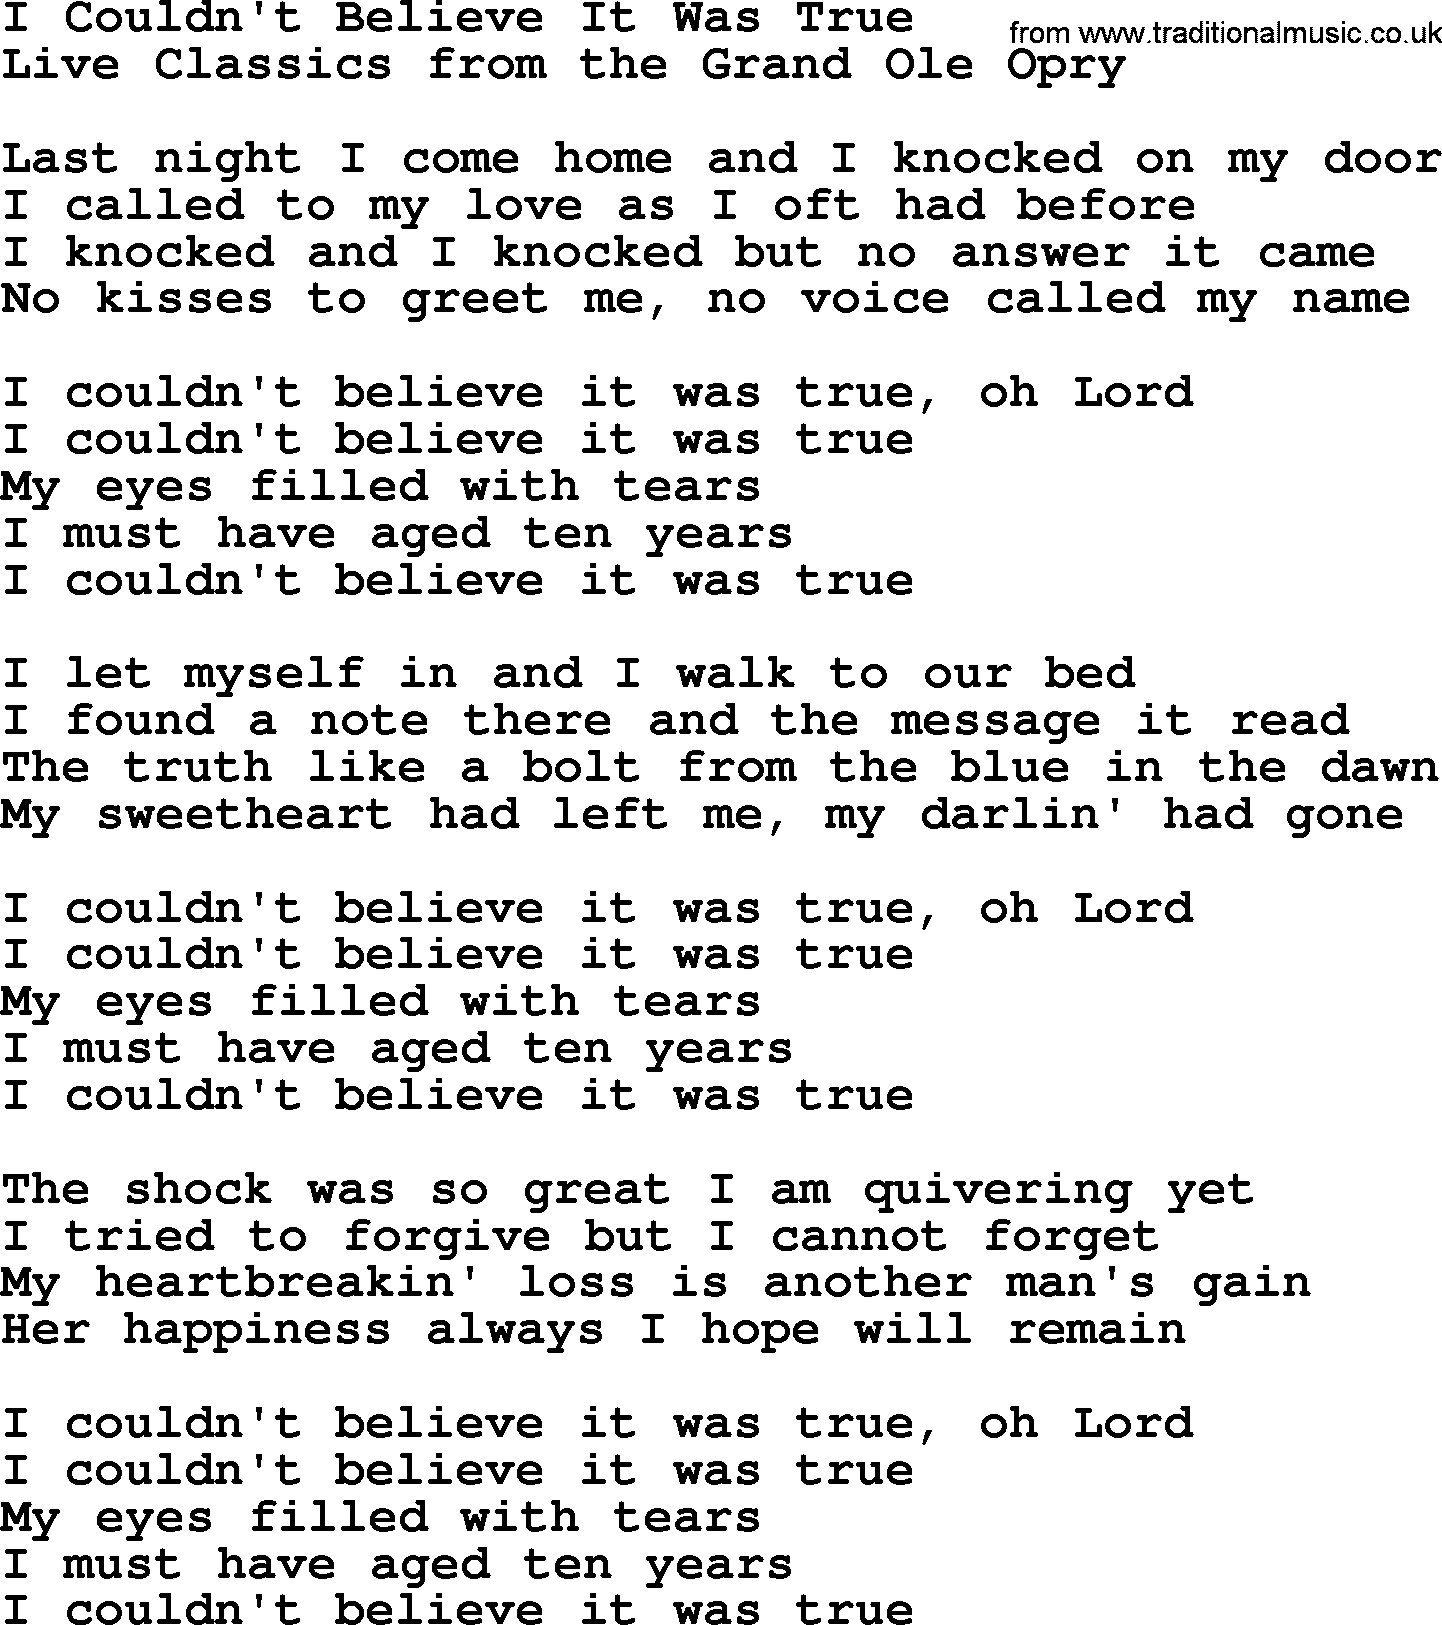 Marty Robbins song: I Couldnt Believe It Was True, lyrics